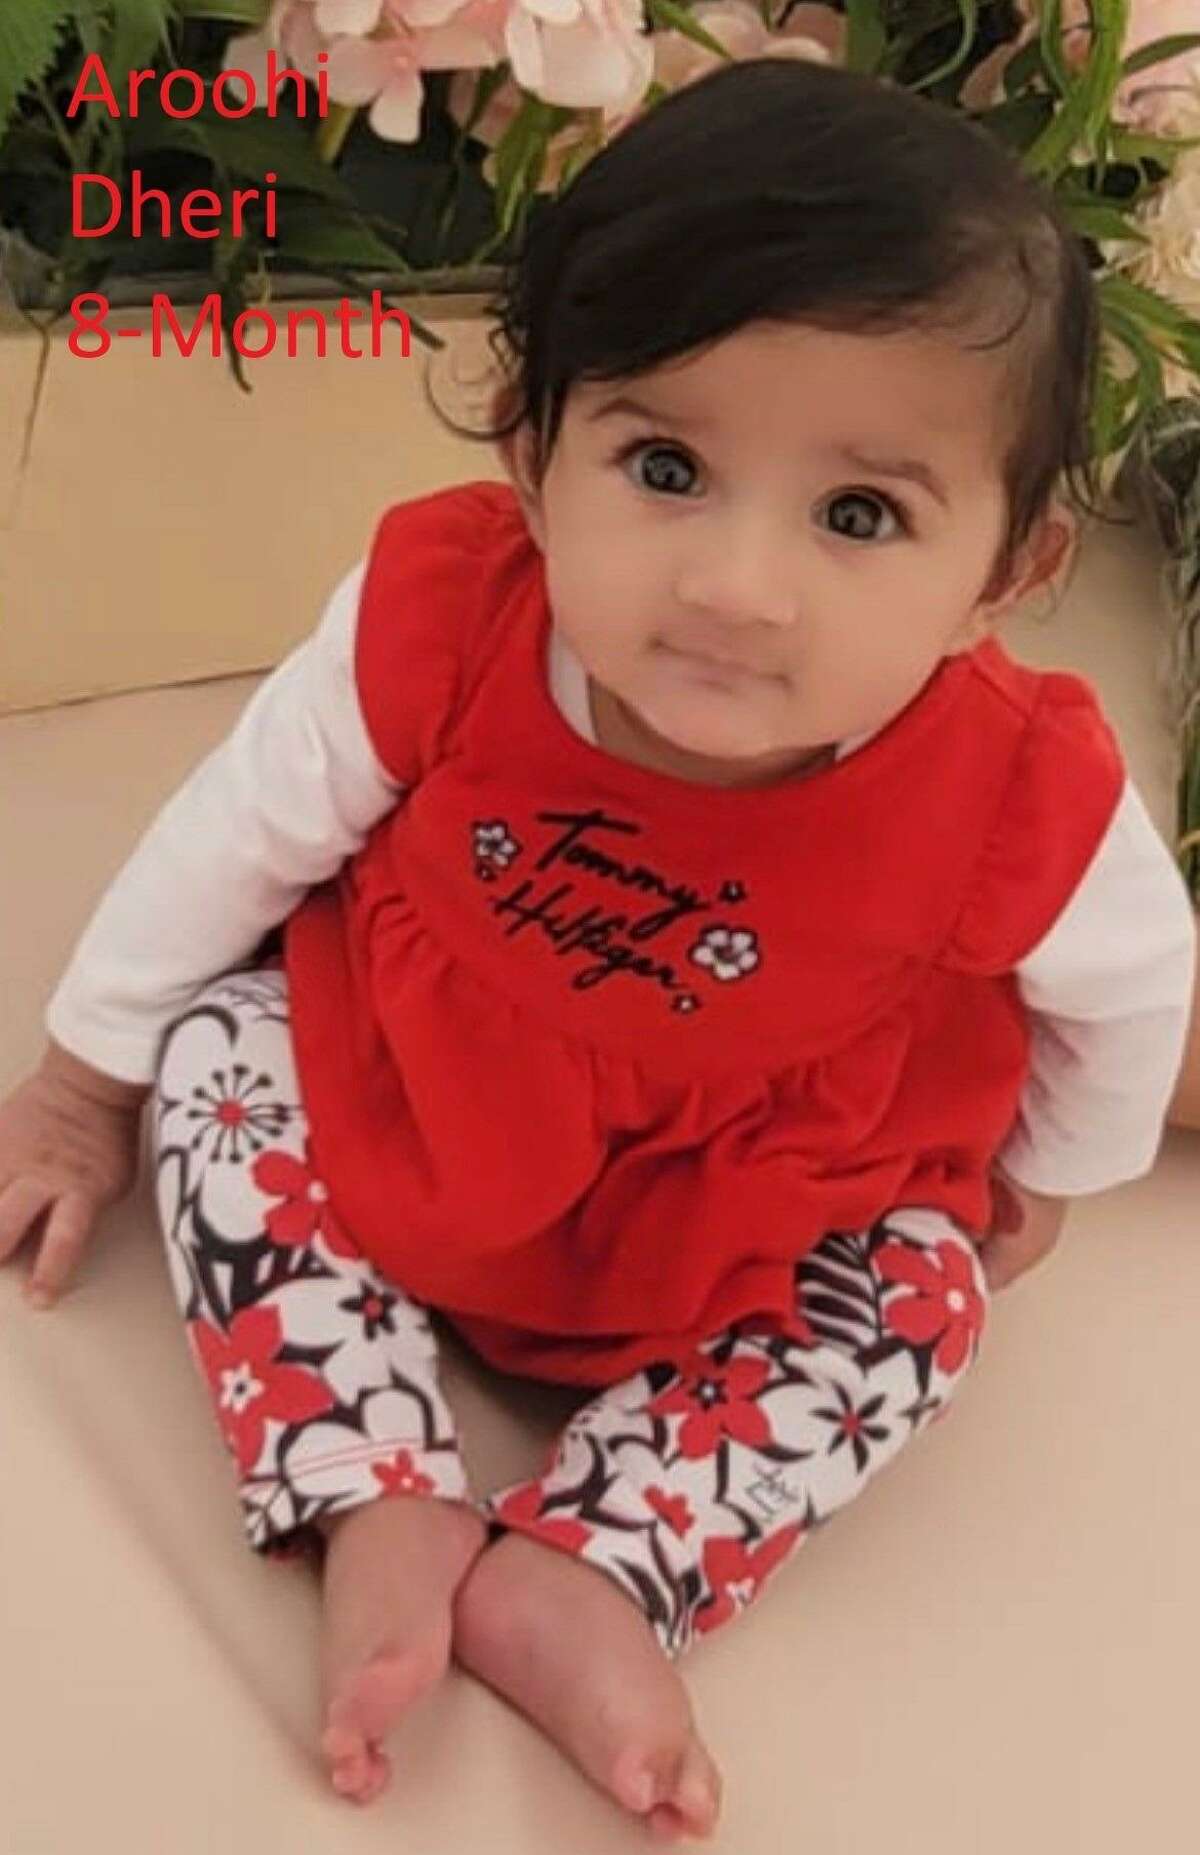 Aroohi Dehri, 8 months old, along with her parents, Jasleen Kaur and Jasdeep Singh, has been missing since Monday after the family was kidnapped in Merced County, authorities said.